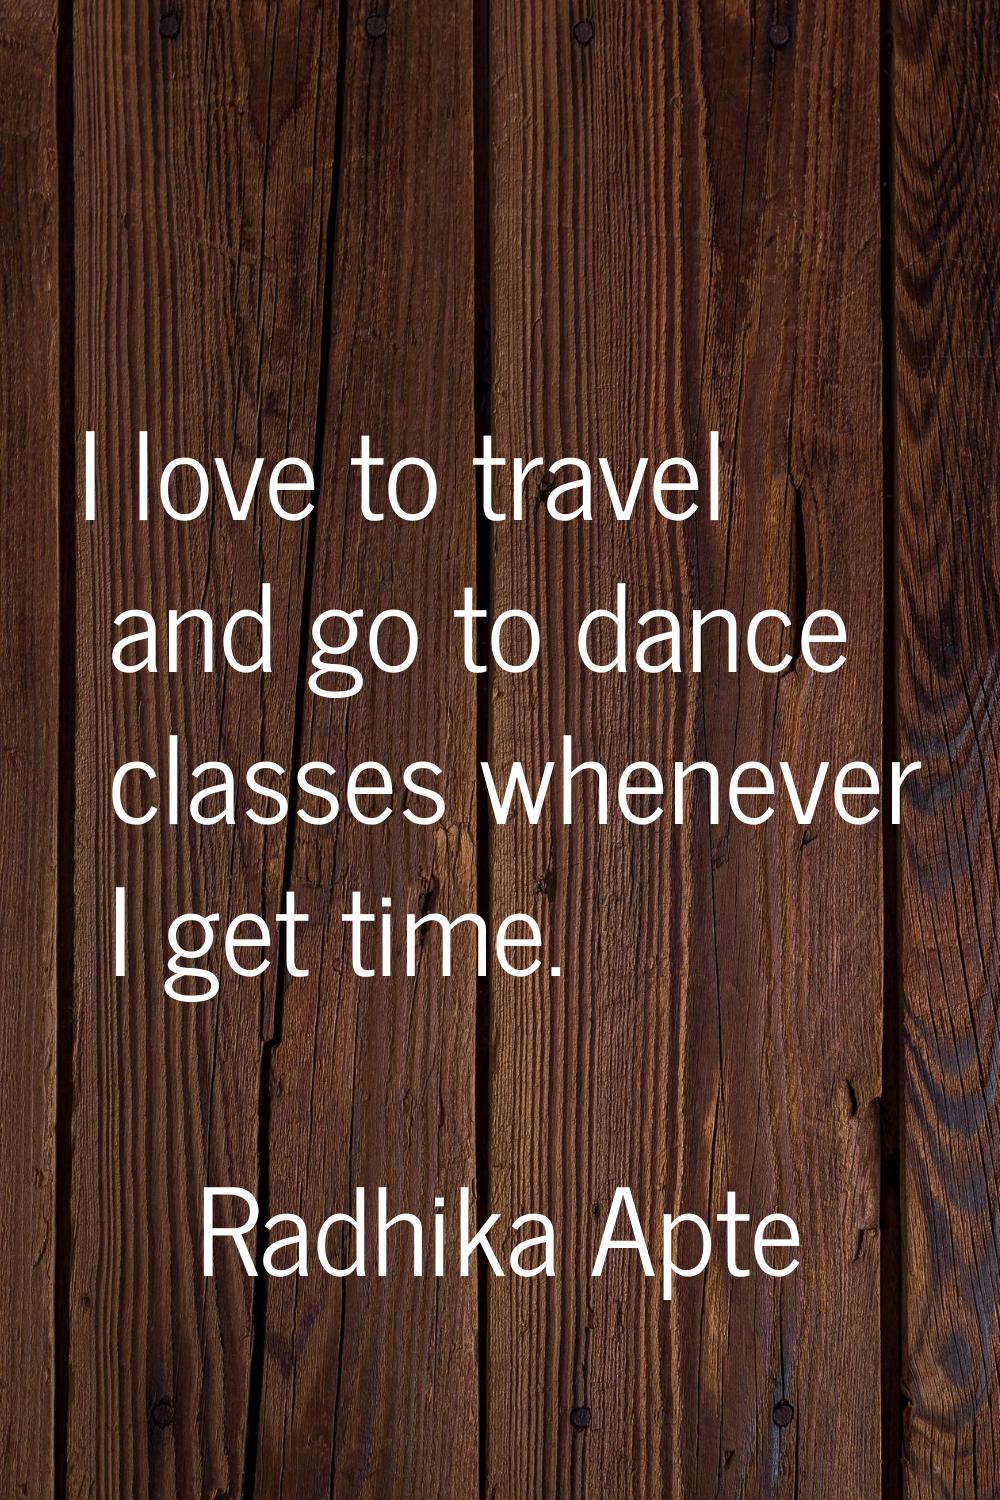 I love to travel and go to dance classes whenever I get time.